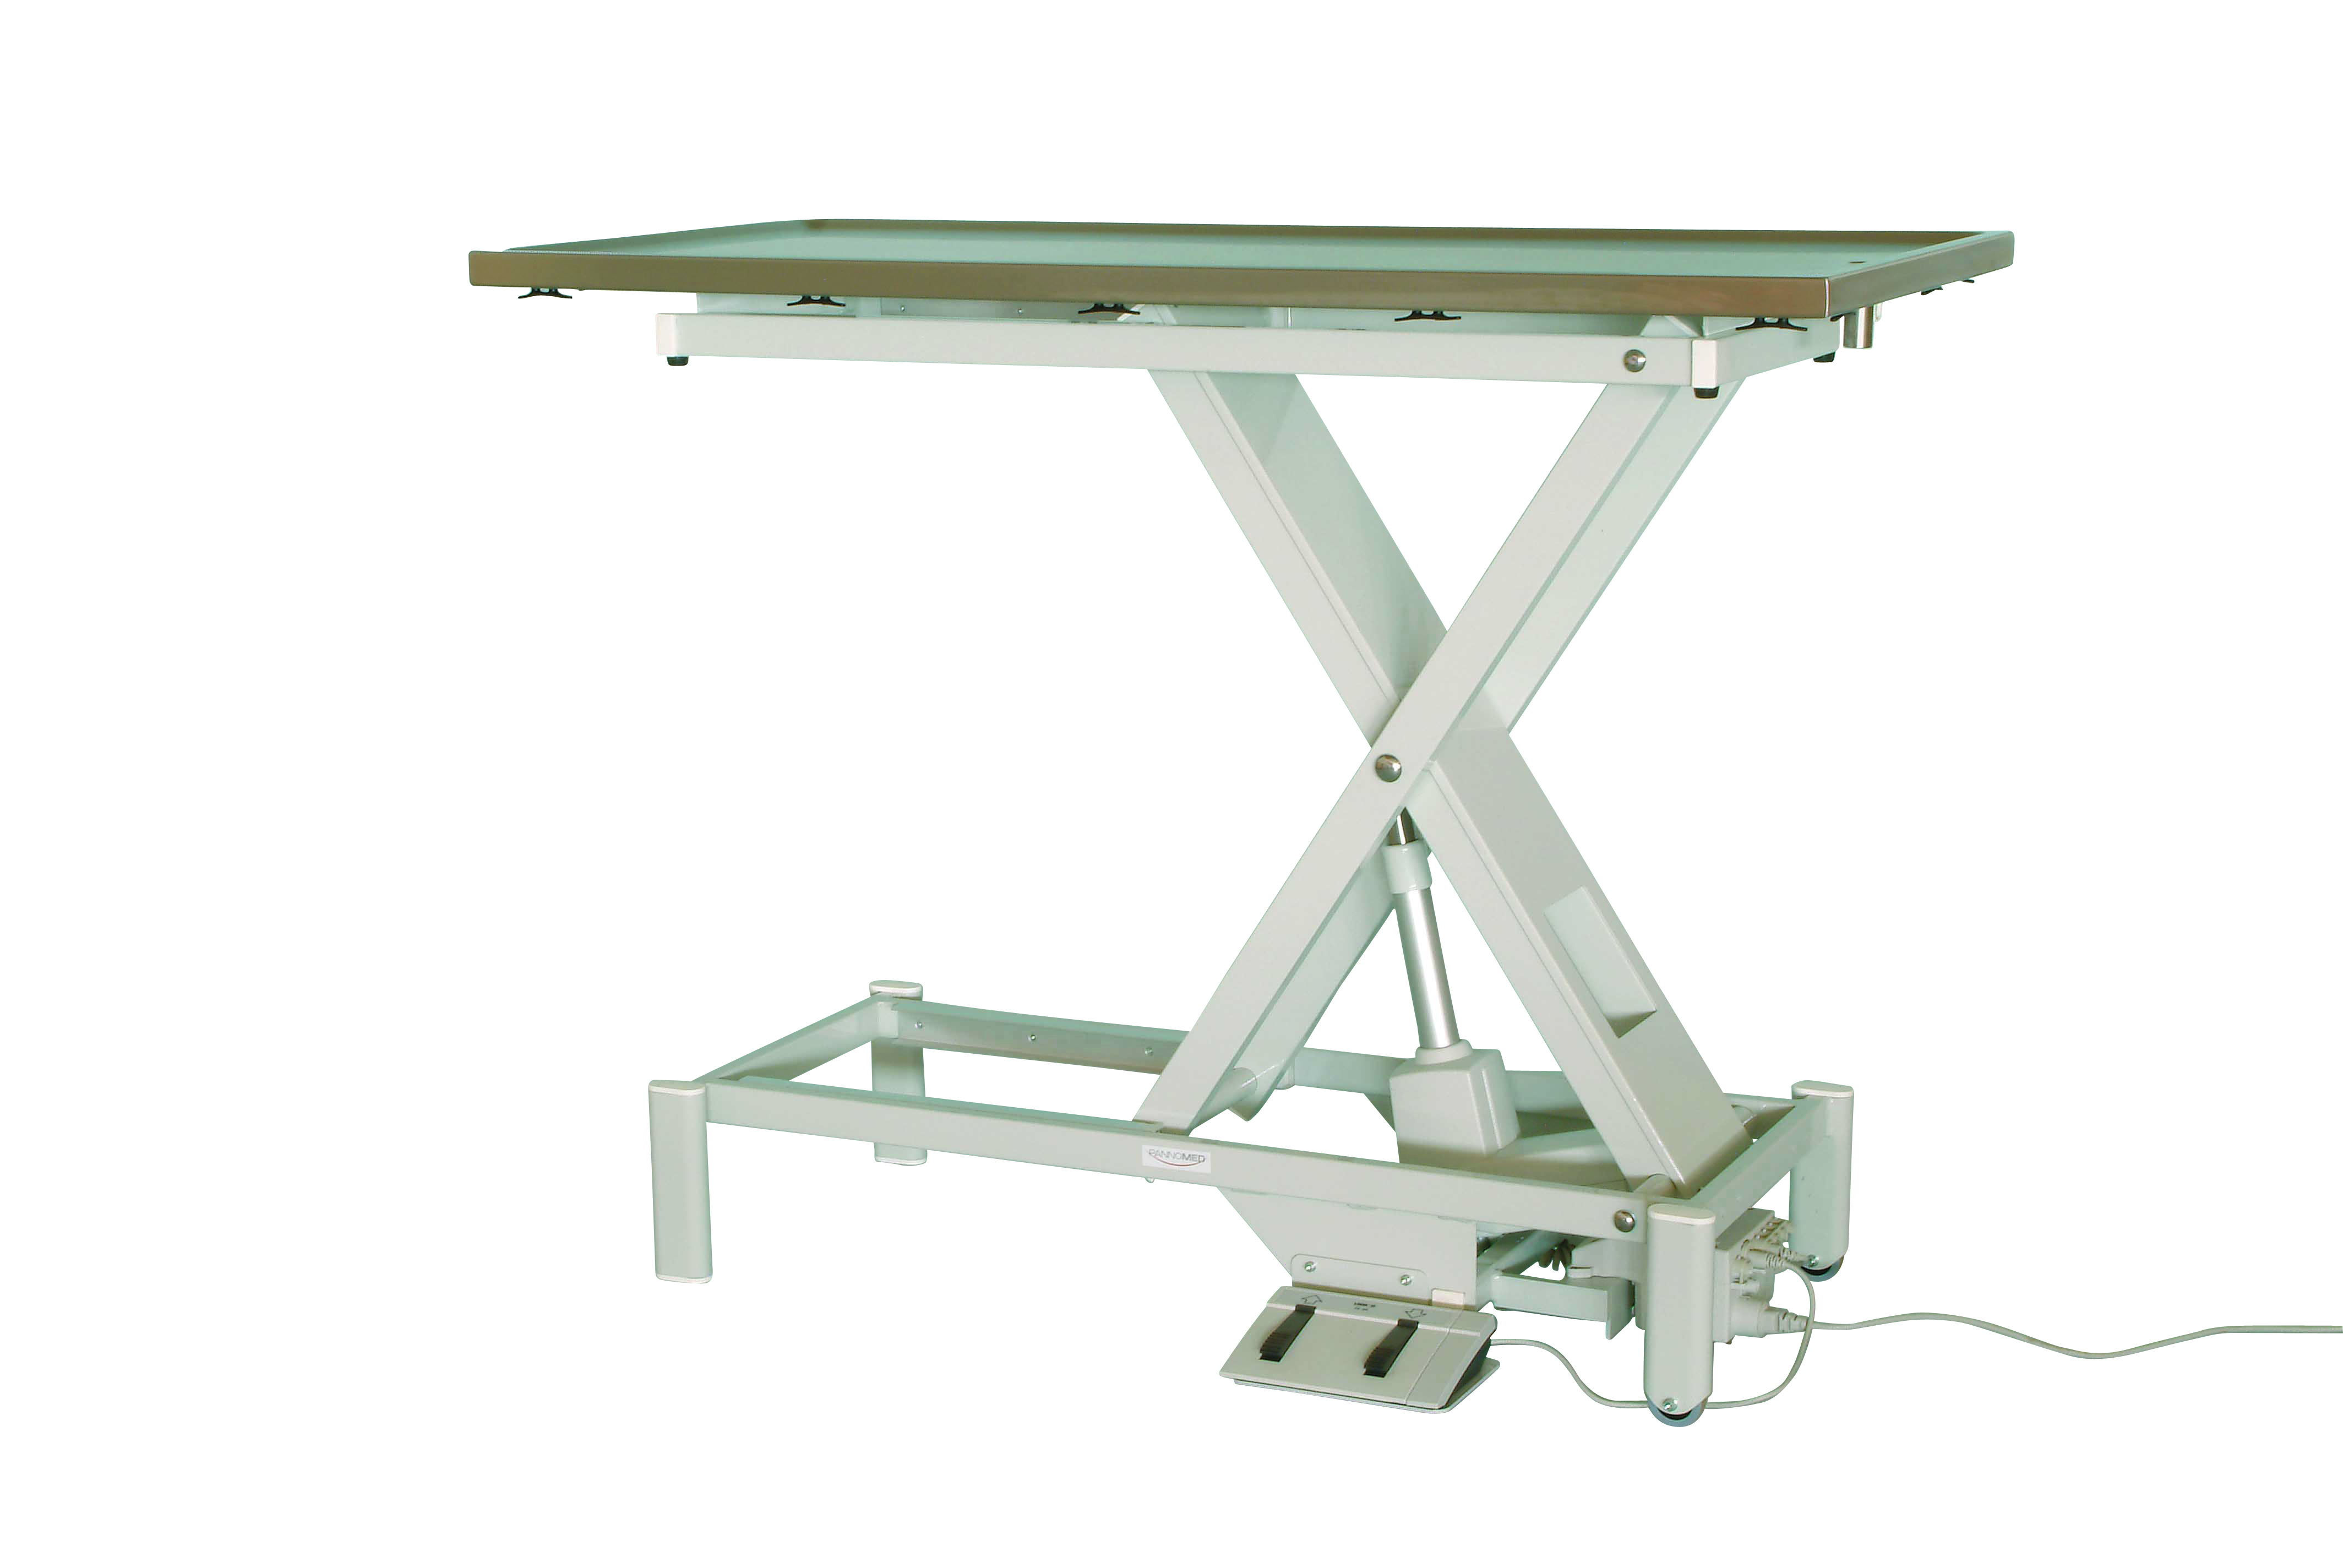 Vet Lift table, hydraulic with stainless steel table top, tilting mechanism, four castors